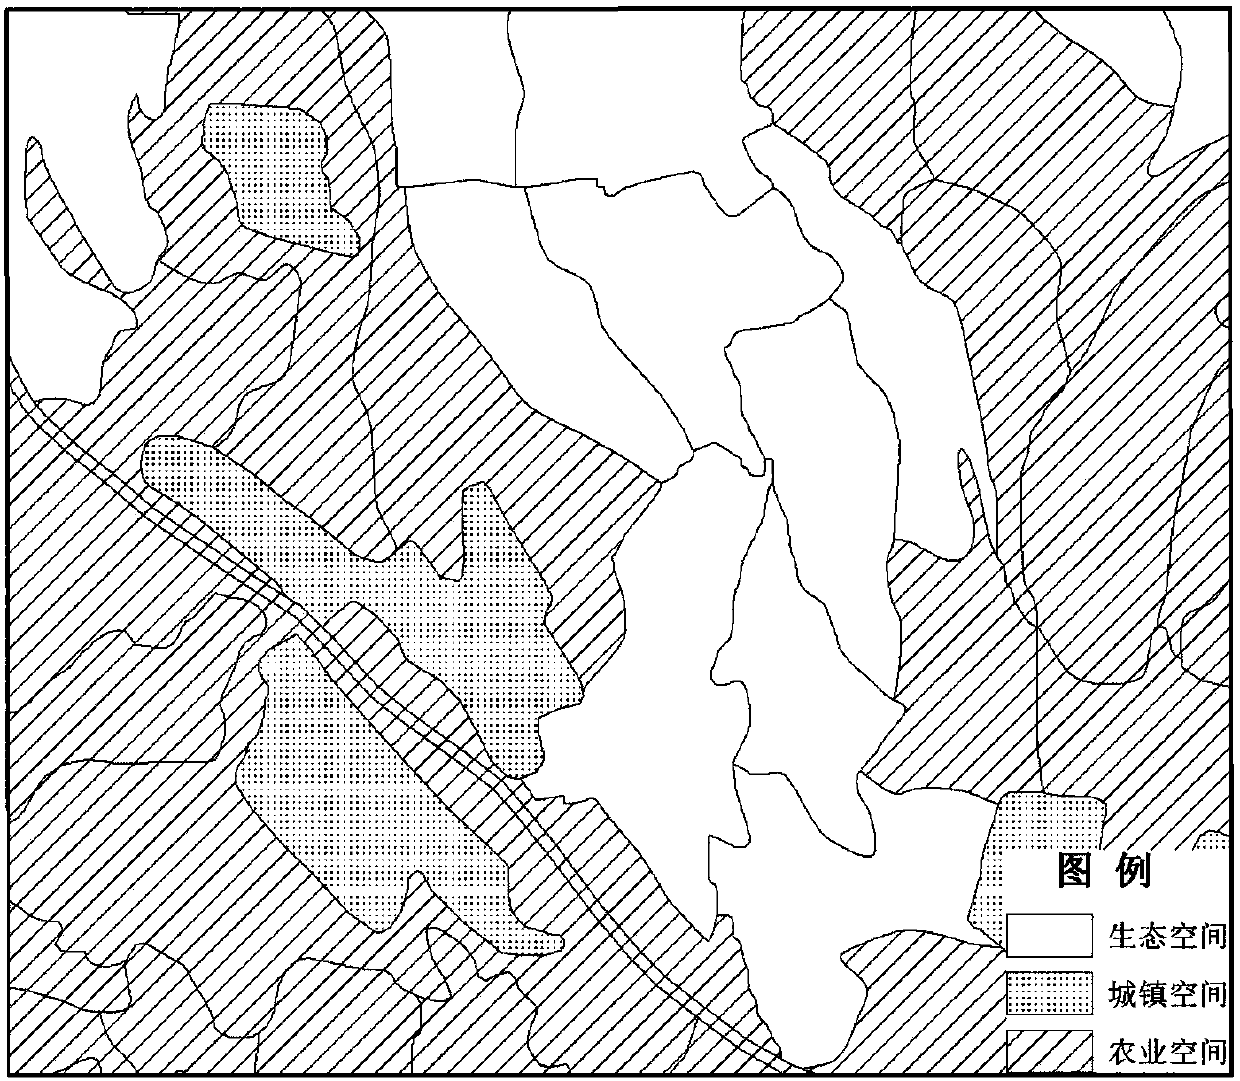 Space function unit-based land area province city and county space planning three-region identification method